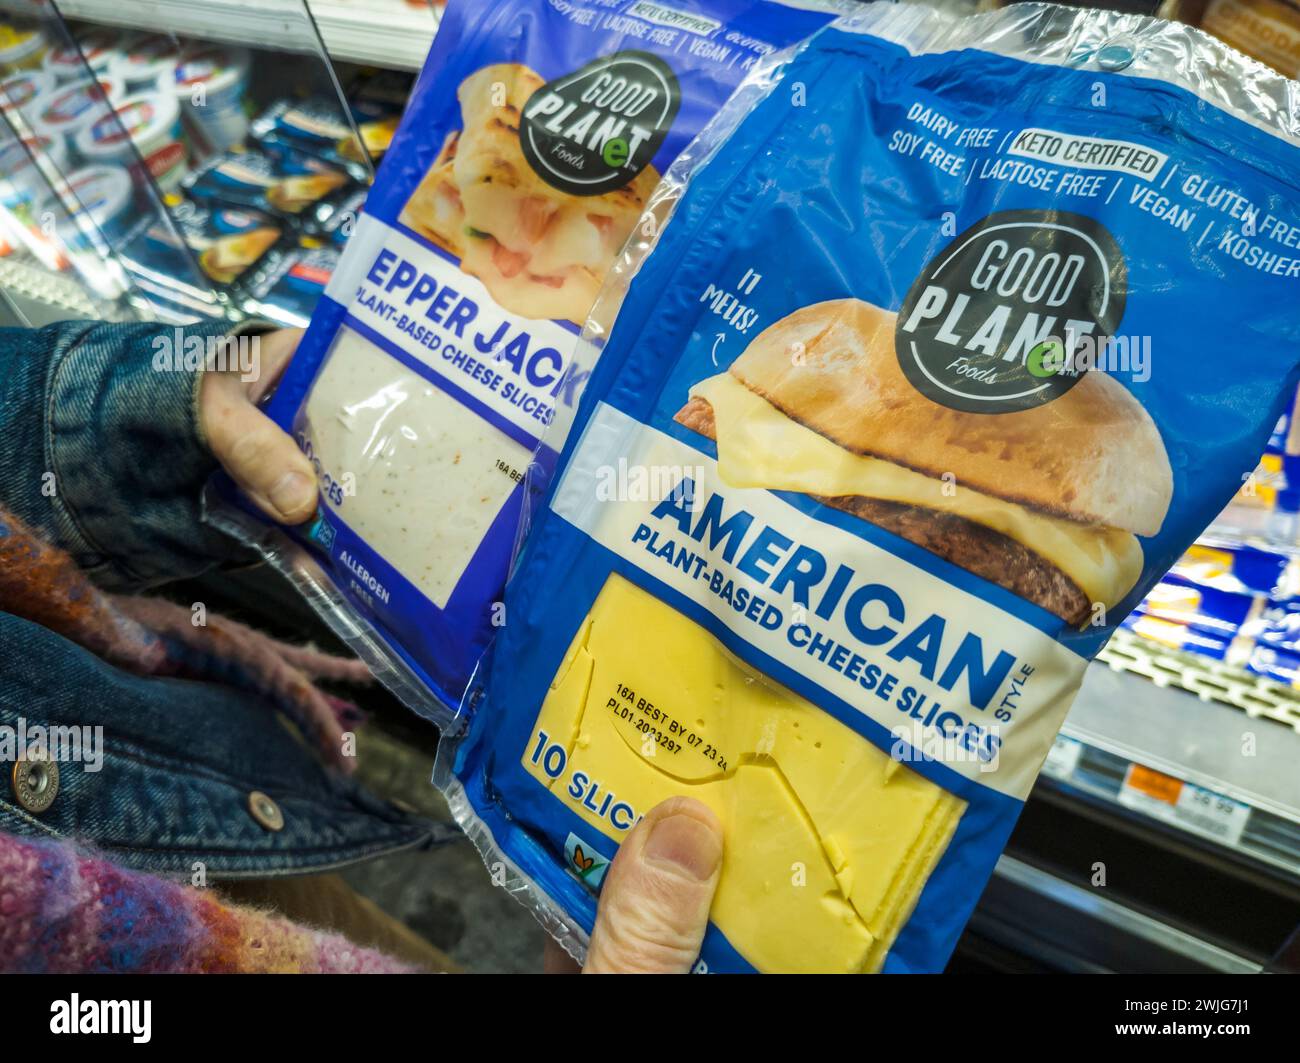 A shopper in a supermarket in New York chooses packages of Good Planet brand plant-based 'cheese' in a supermarket in New York on Friday, February 9, 2024. (© Richard B. Levine) Stock Photo